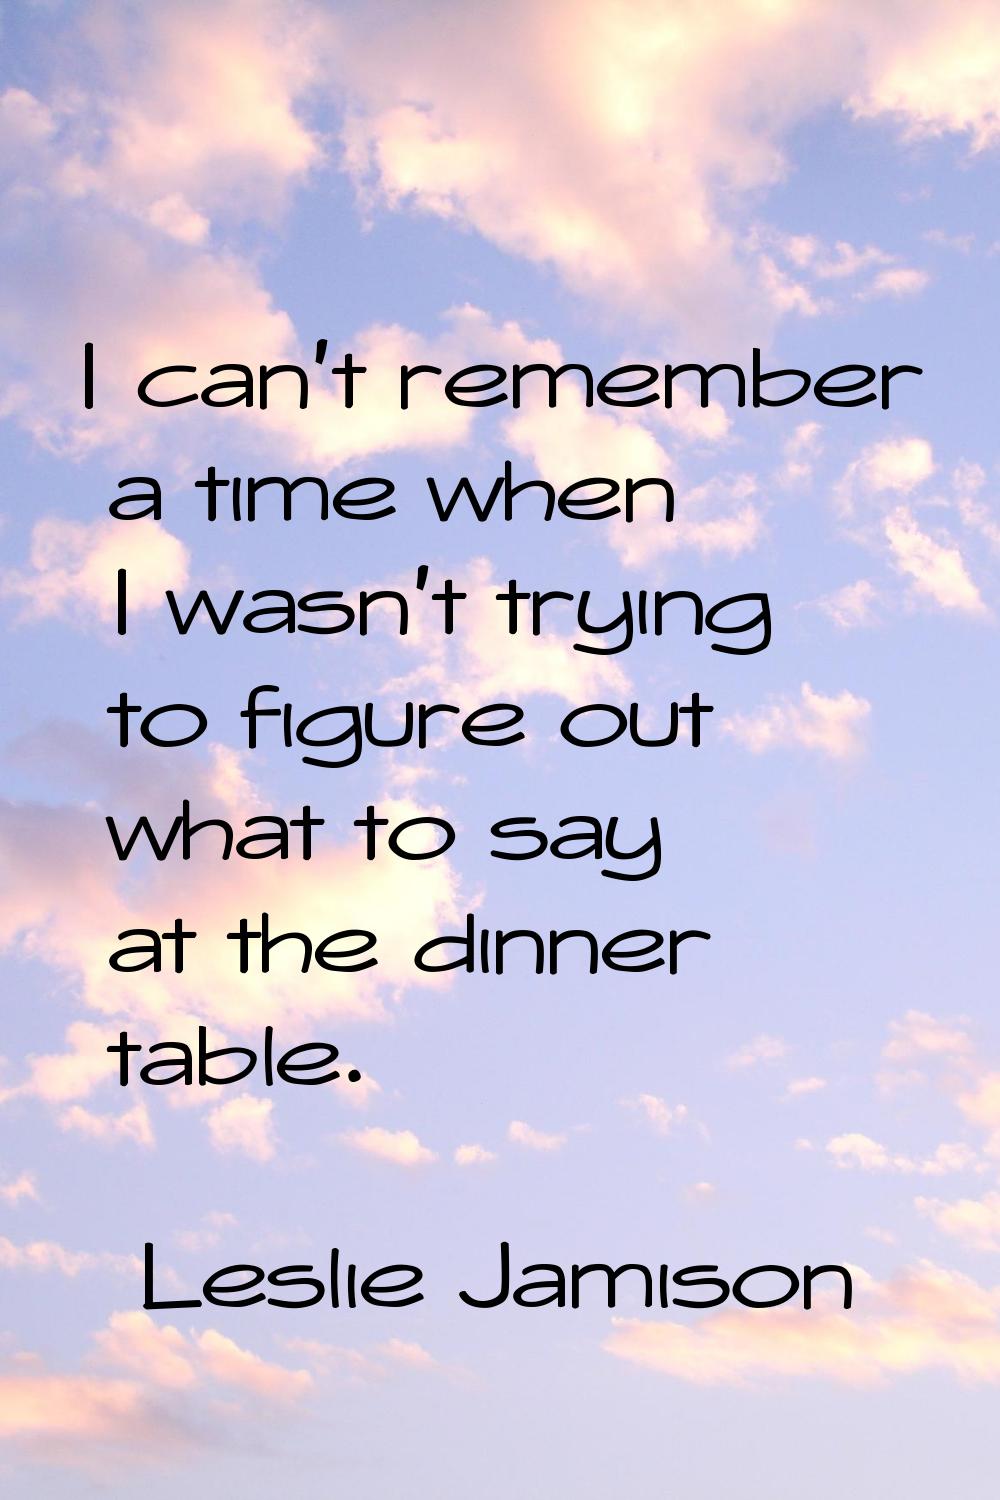 I can't remember a time when I wasn't trying to figure out what to say at the dinner table.